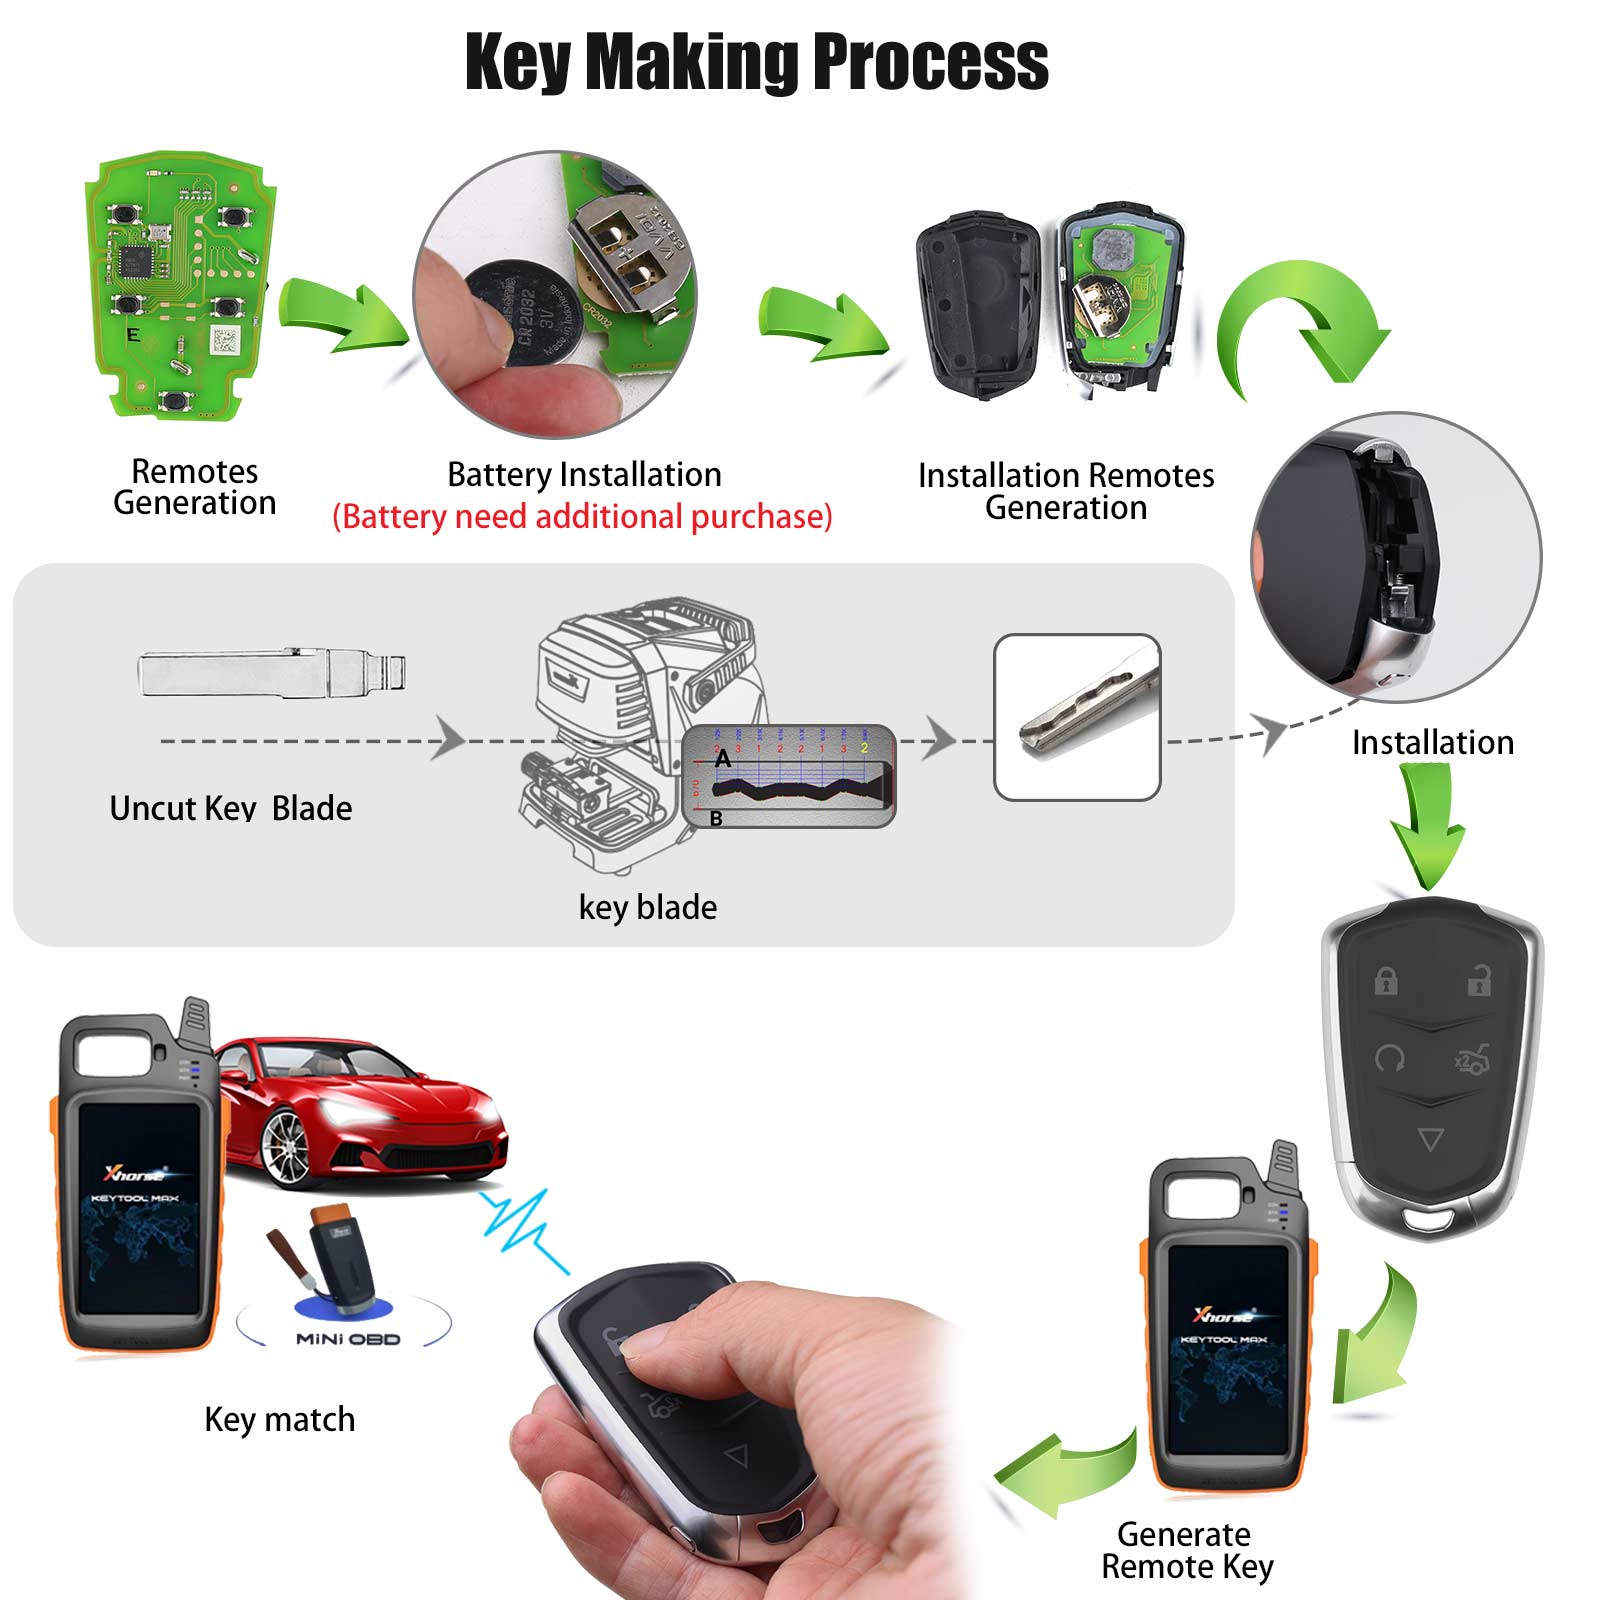 Xhorse XSCD01EN XM38 Universal Smart Key for Cadillac Style 5 Buttons